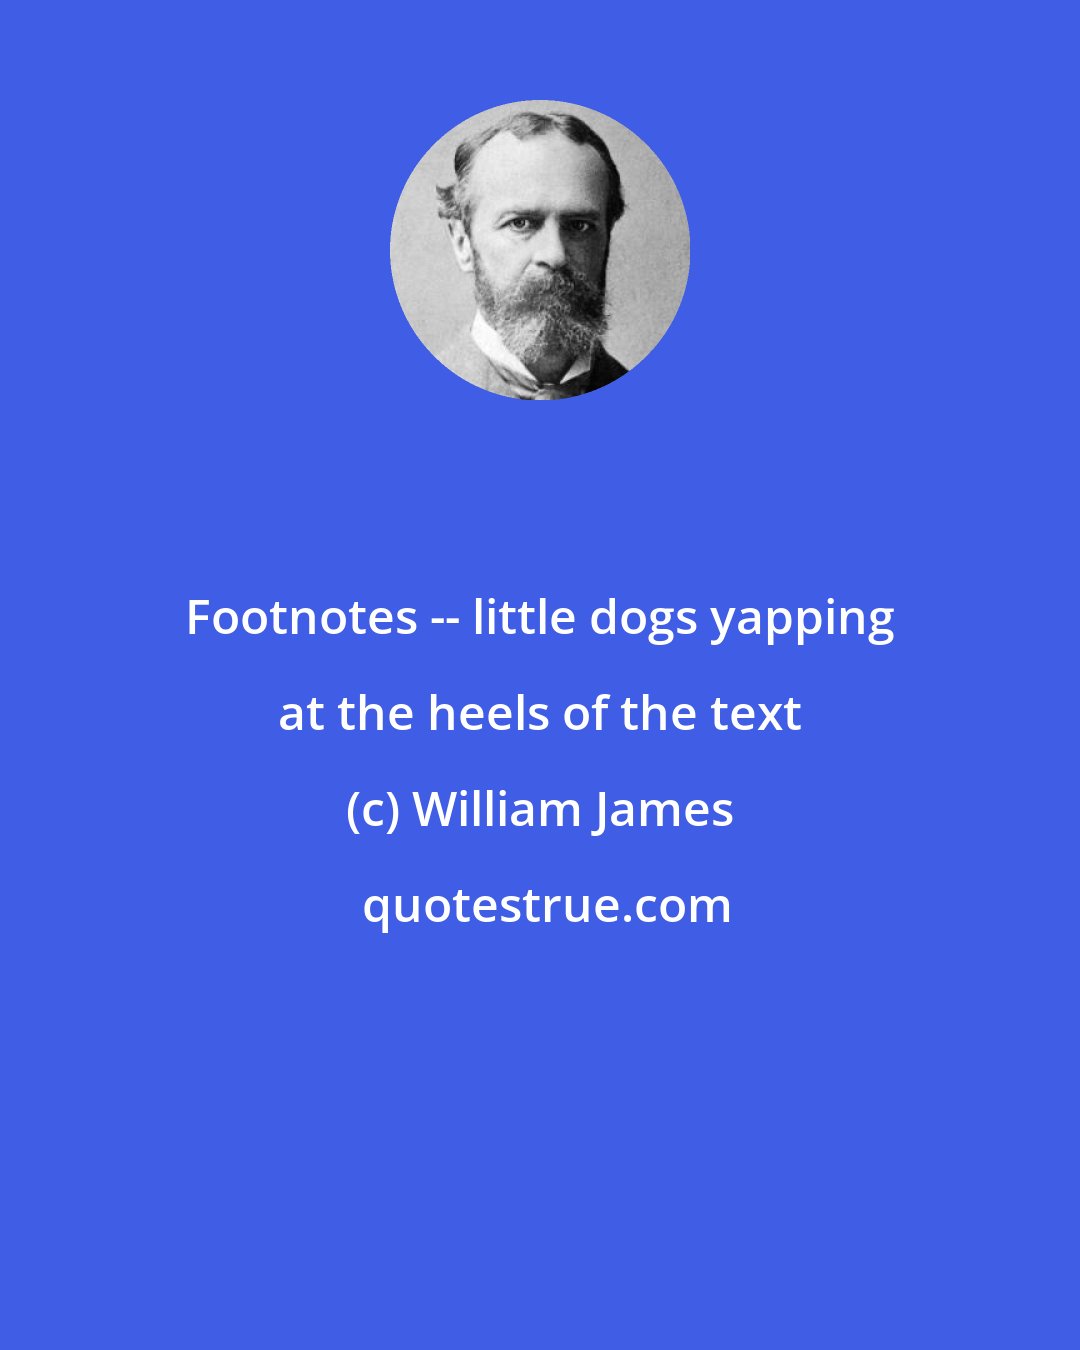 William James: Footnotes -- little dogs yapping at the heels of the text